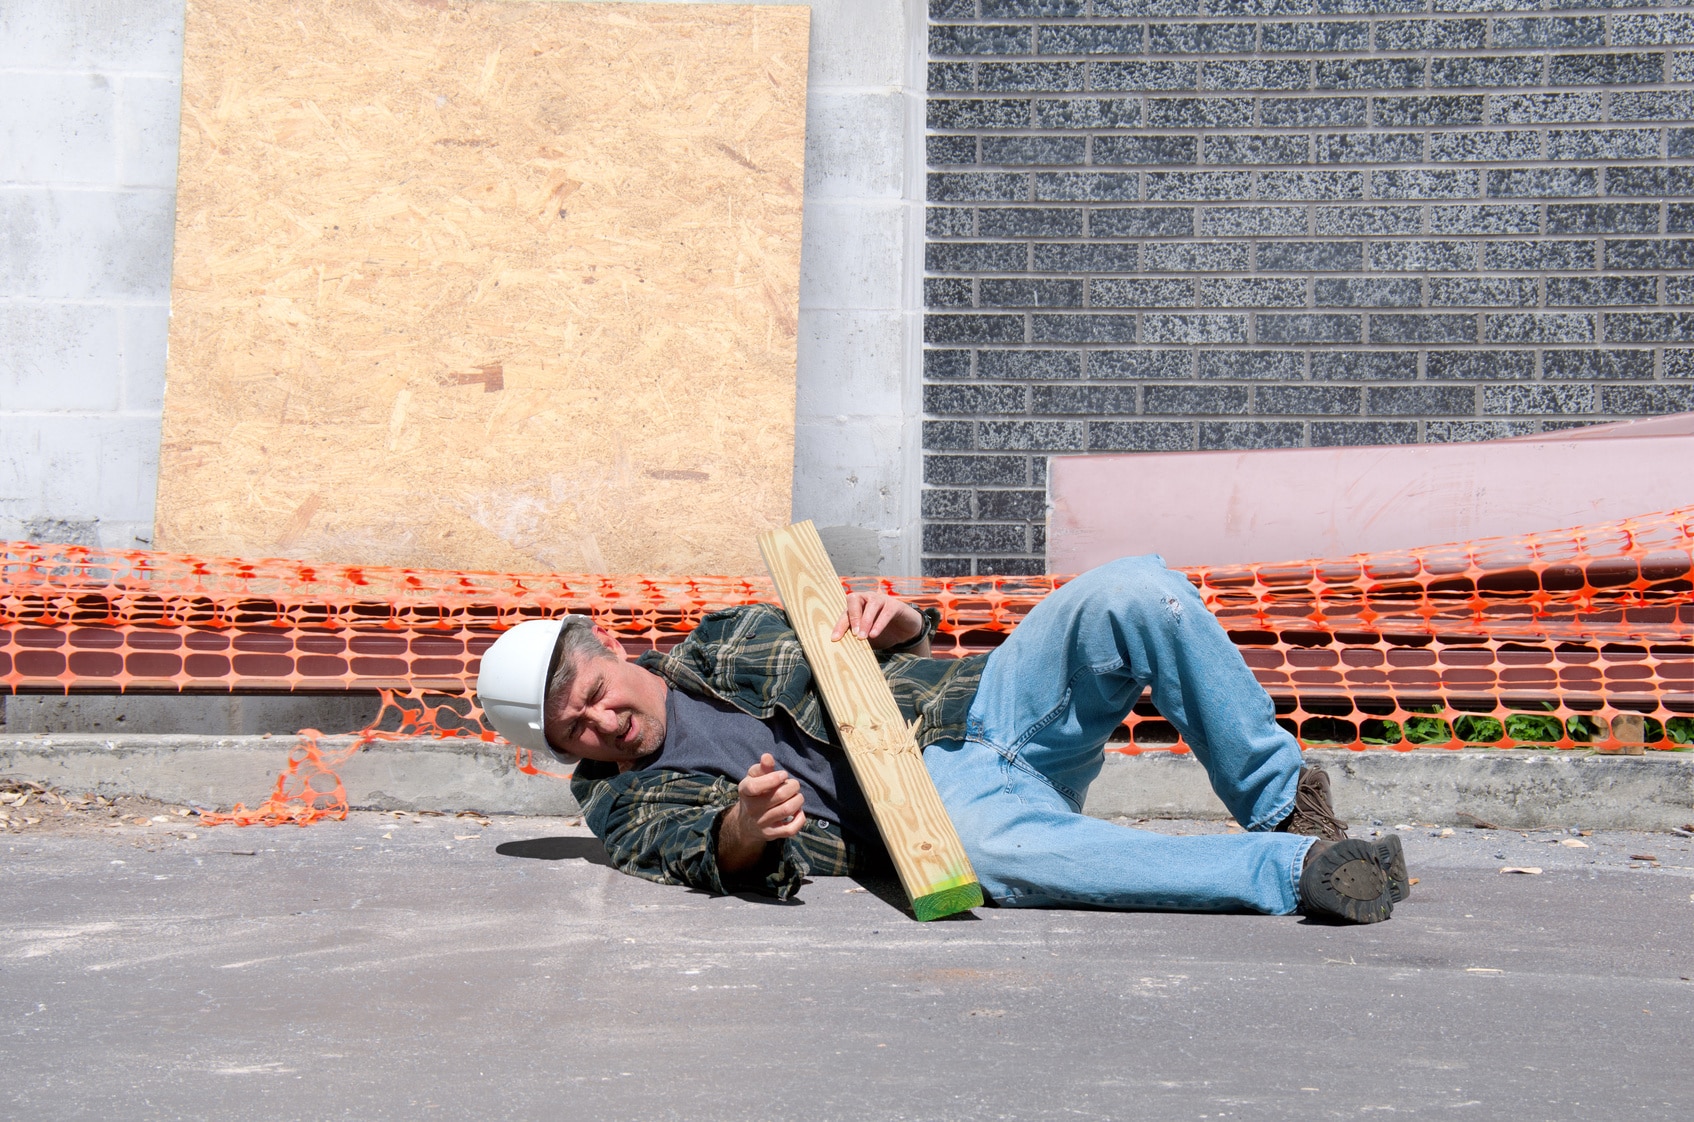 workers compensation in illinois